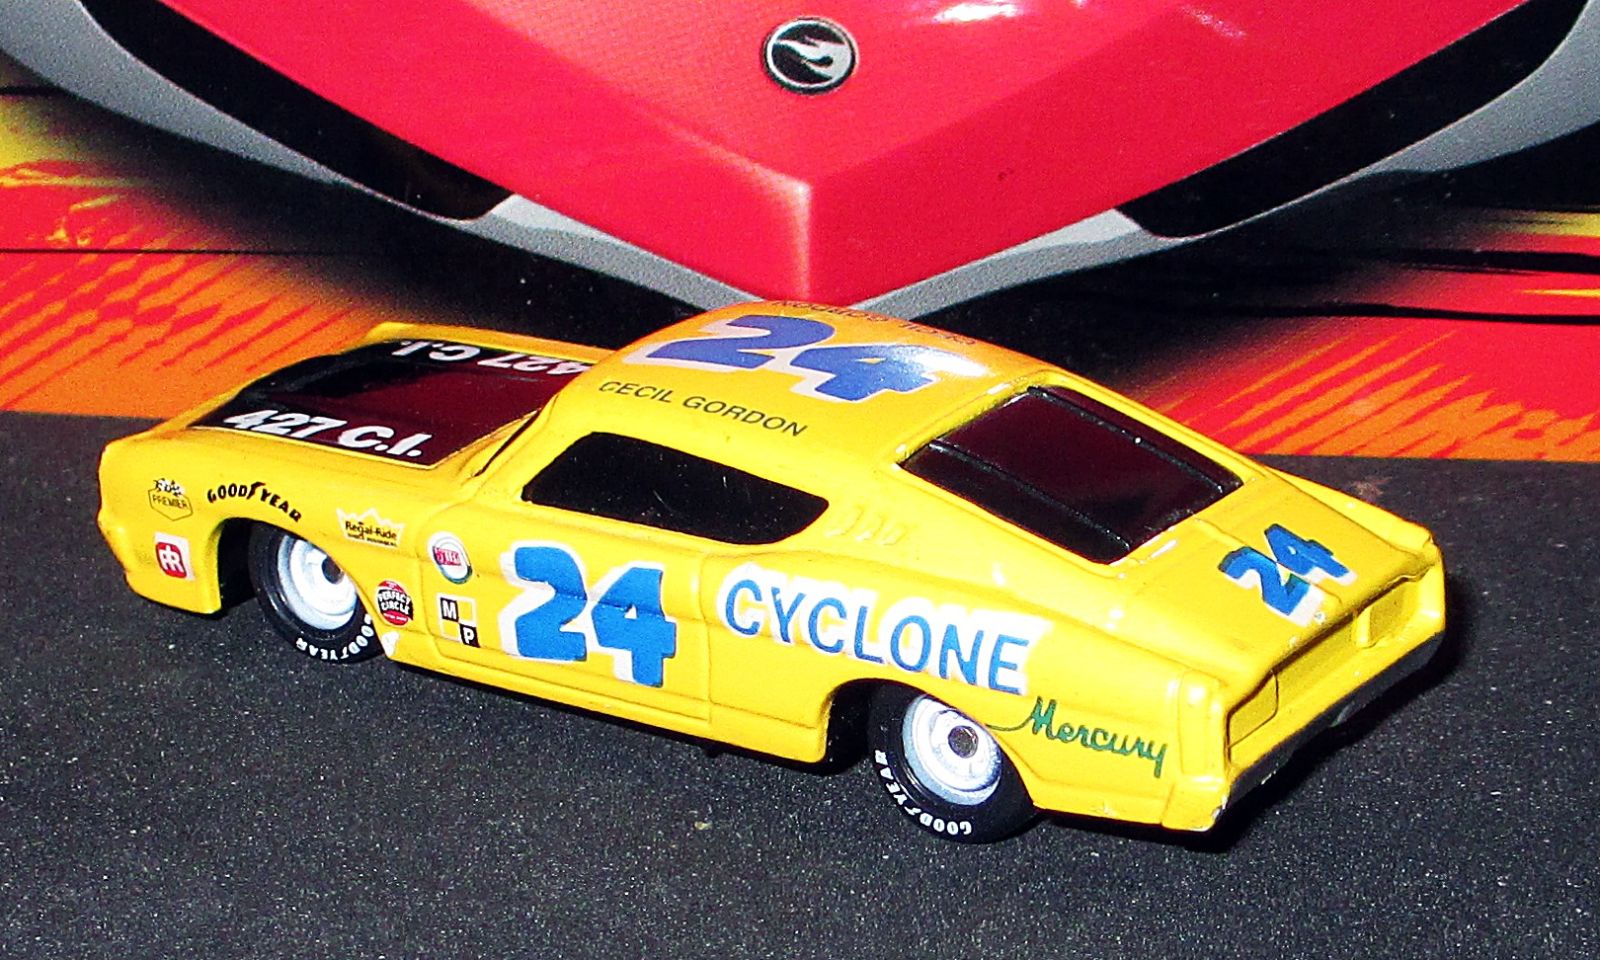 Illustration for article titled Muscle Monday: 69 Mercury Cyclone NASCAR Racer